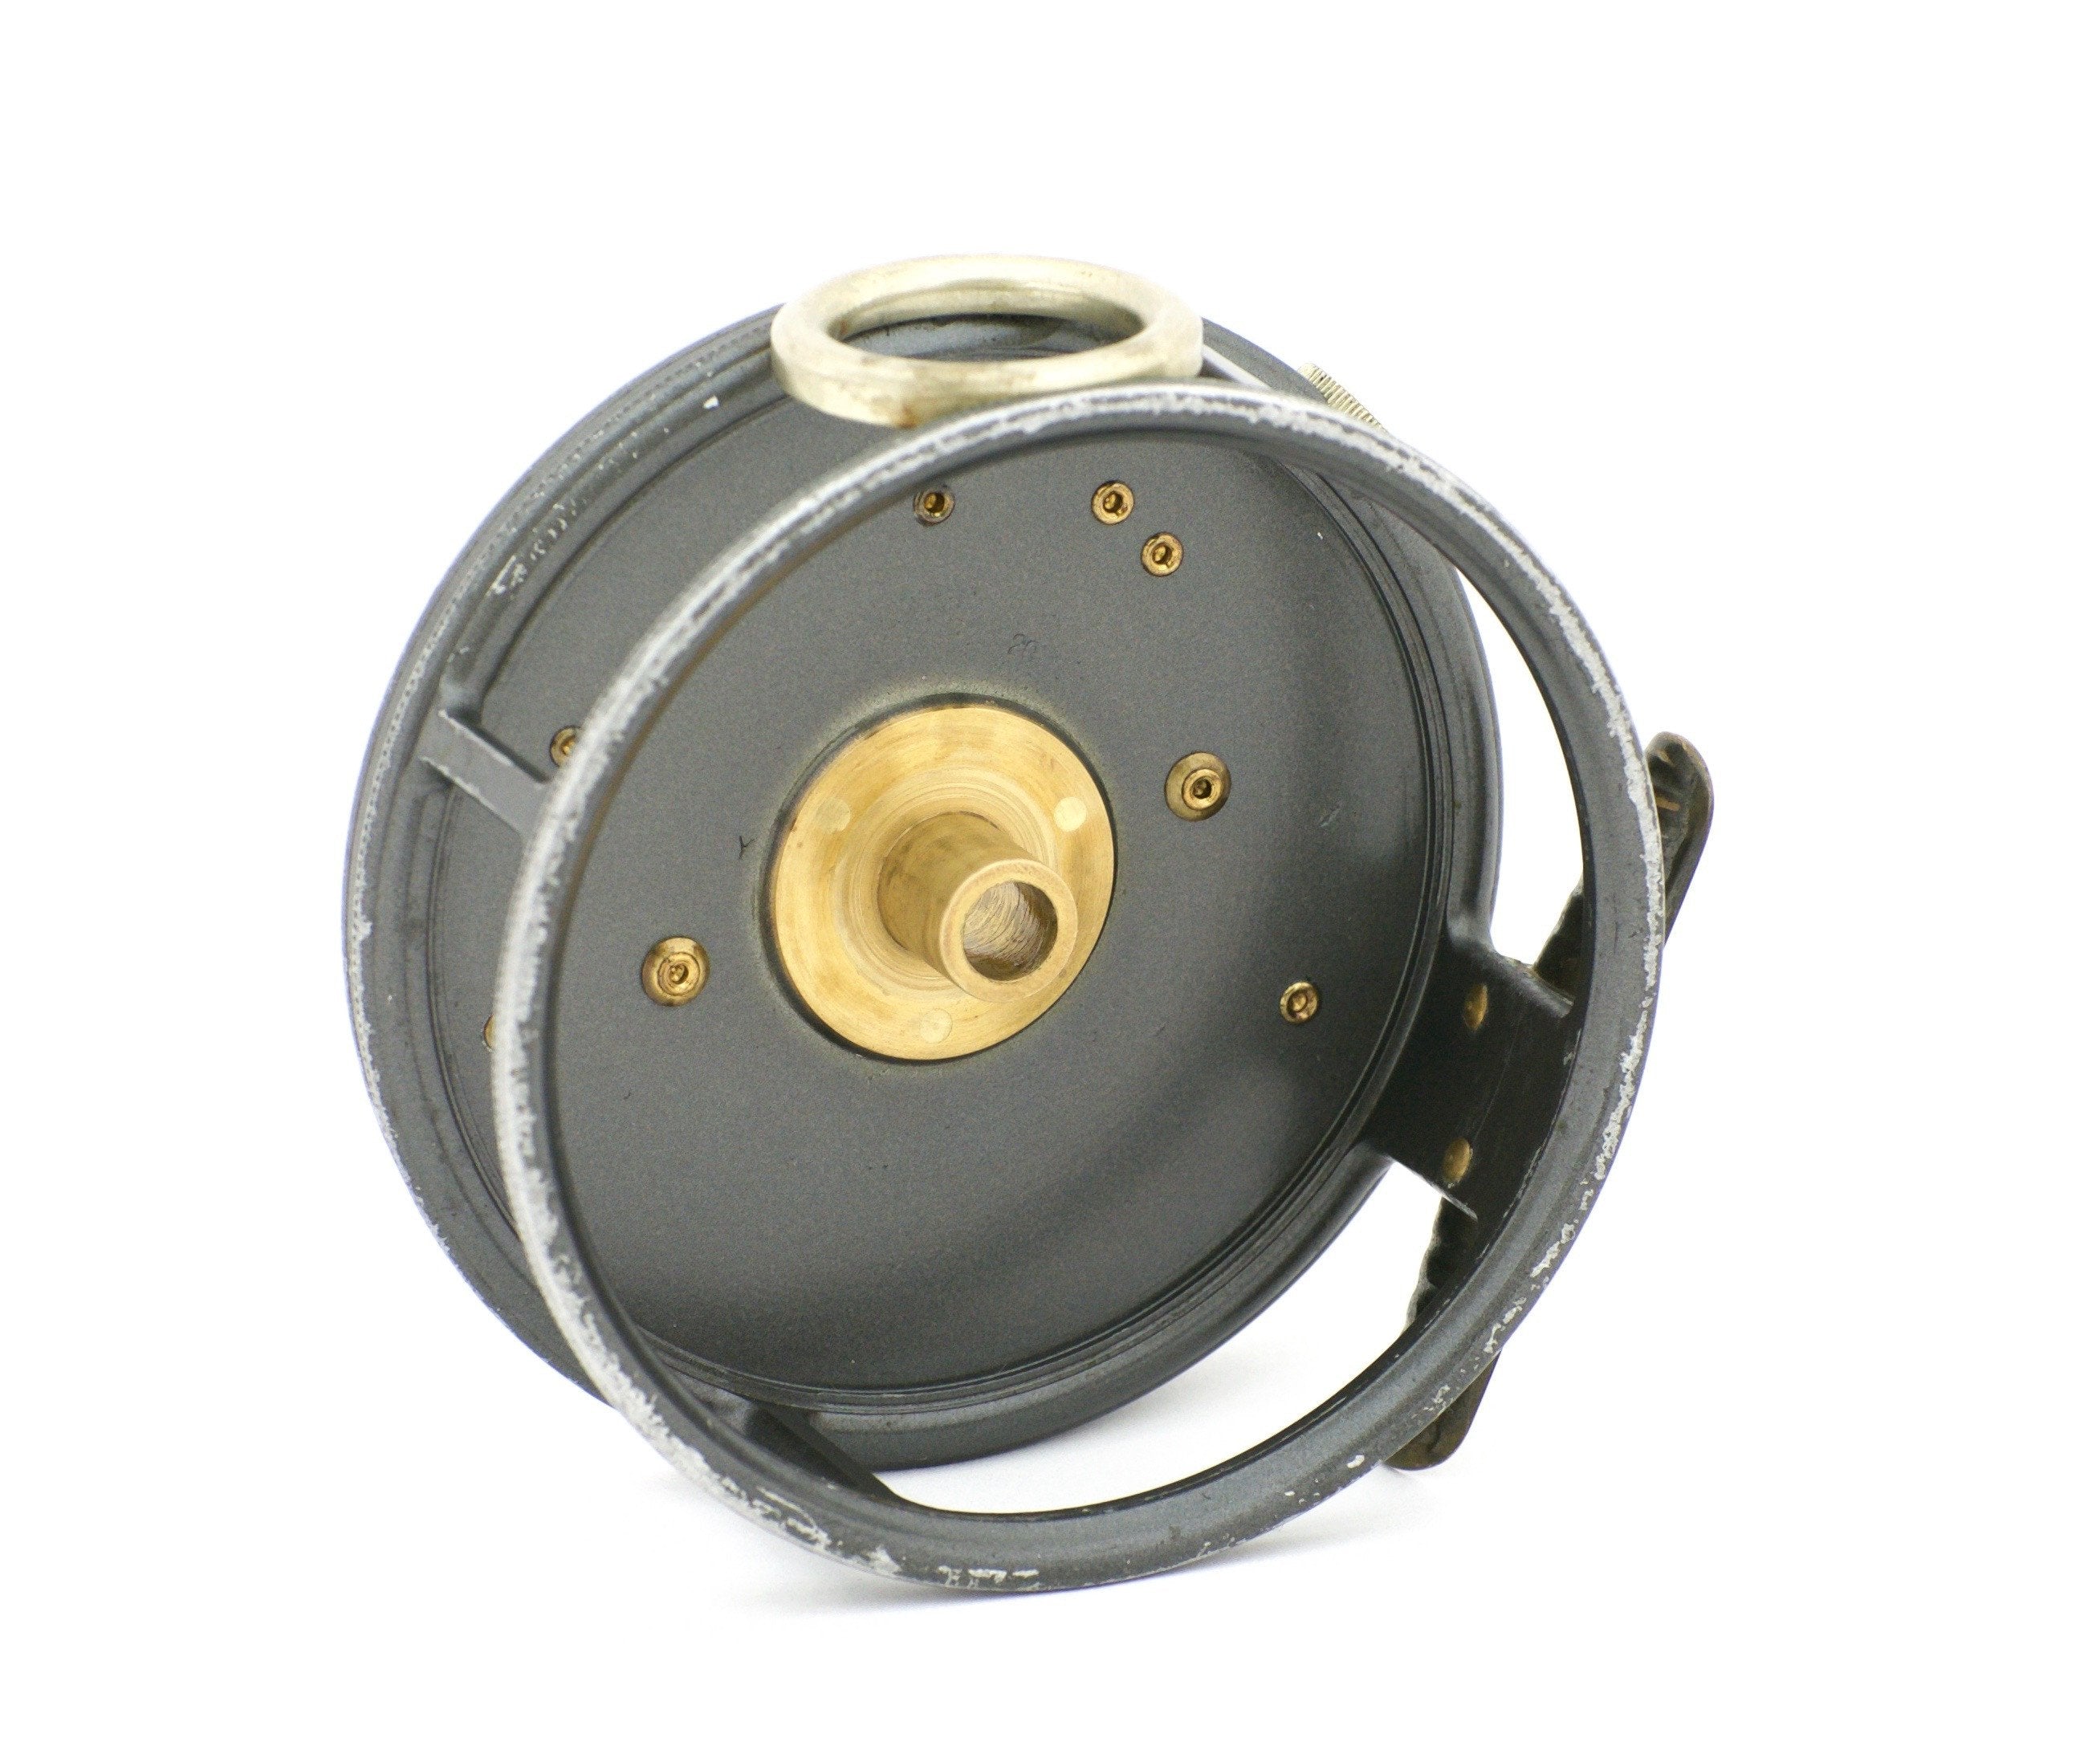 Hardy Perfect Taupo 3 7/8 Fly Reel - The Original Taupo